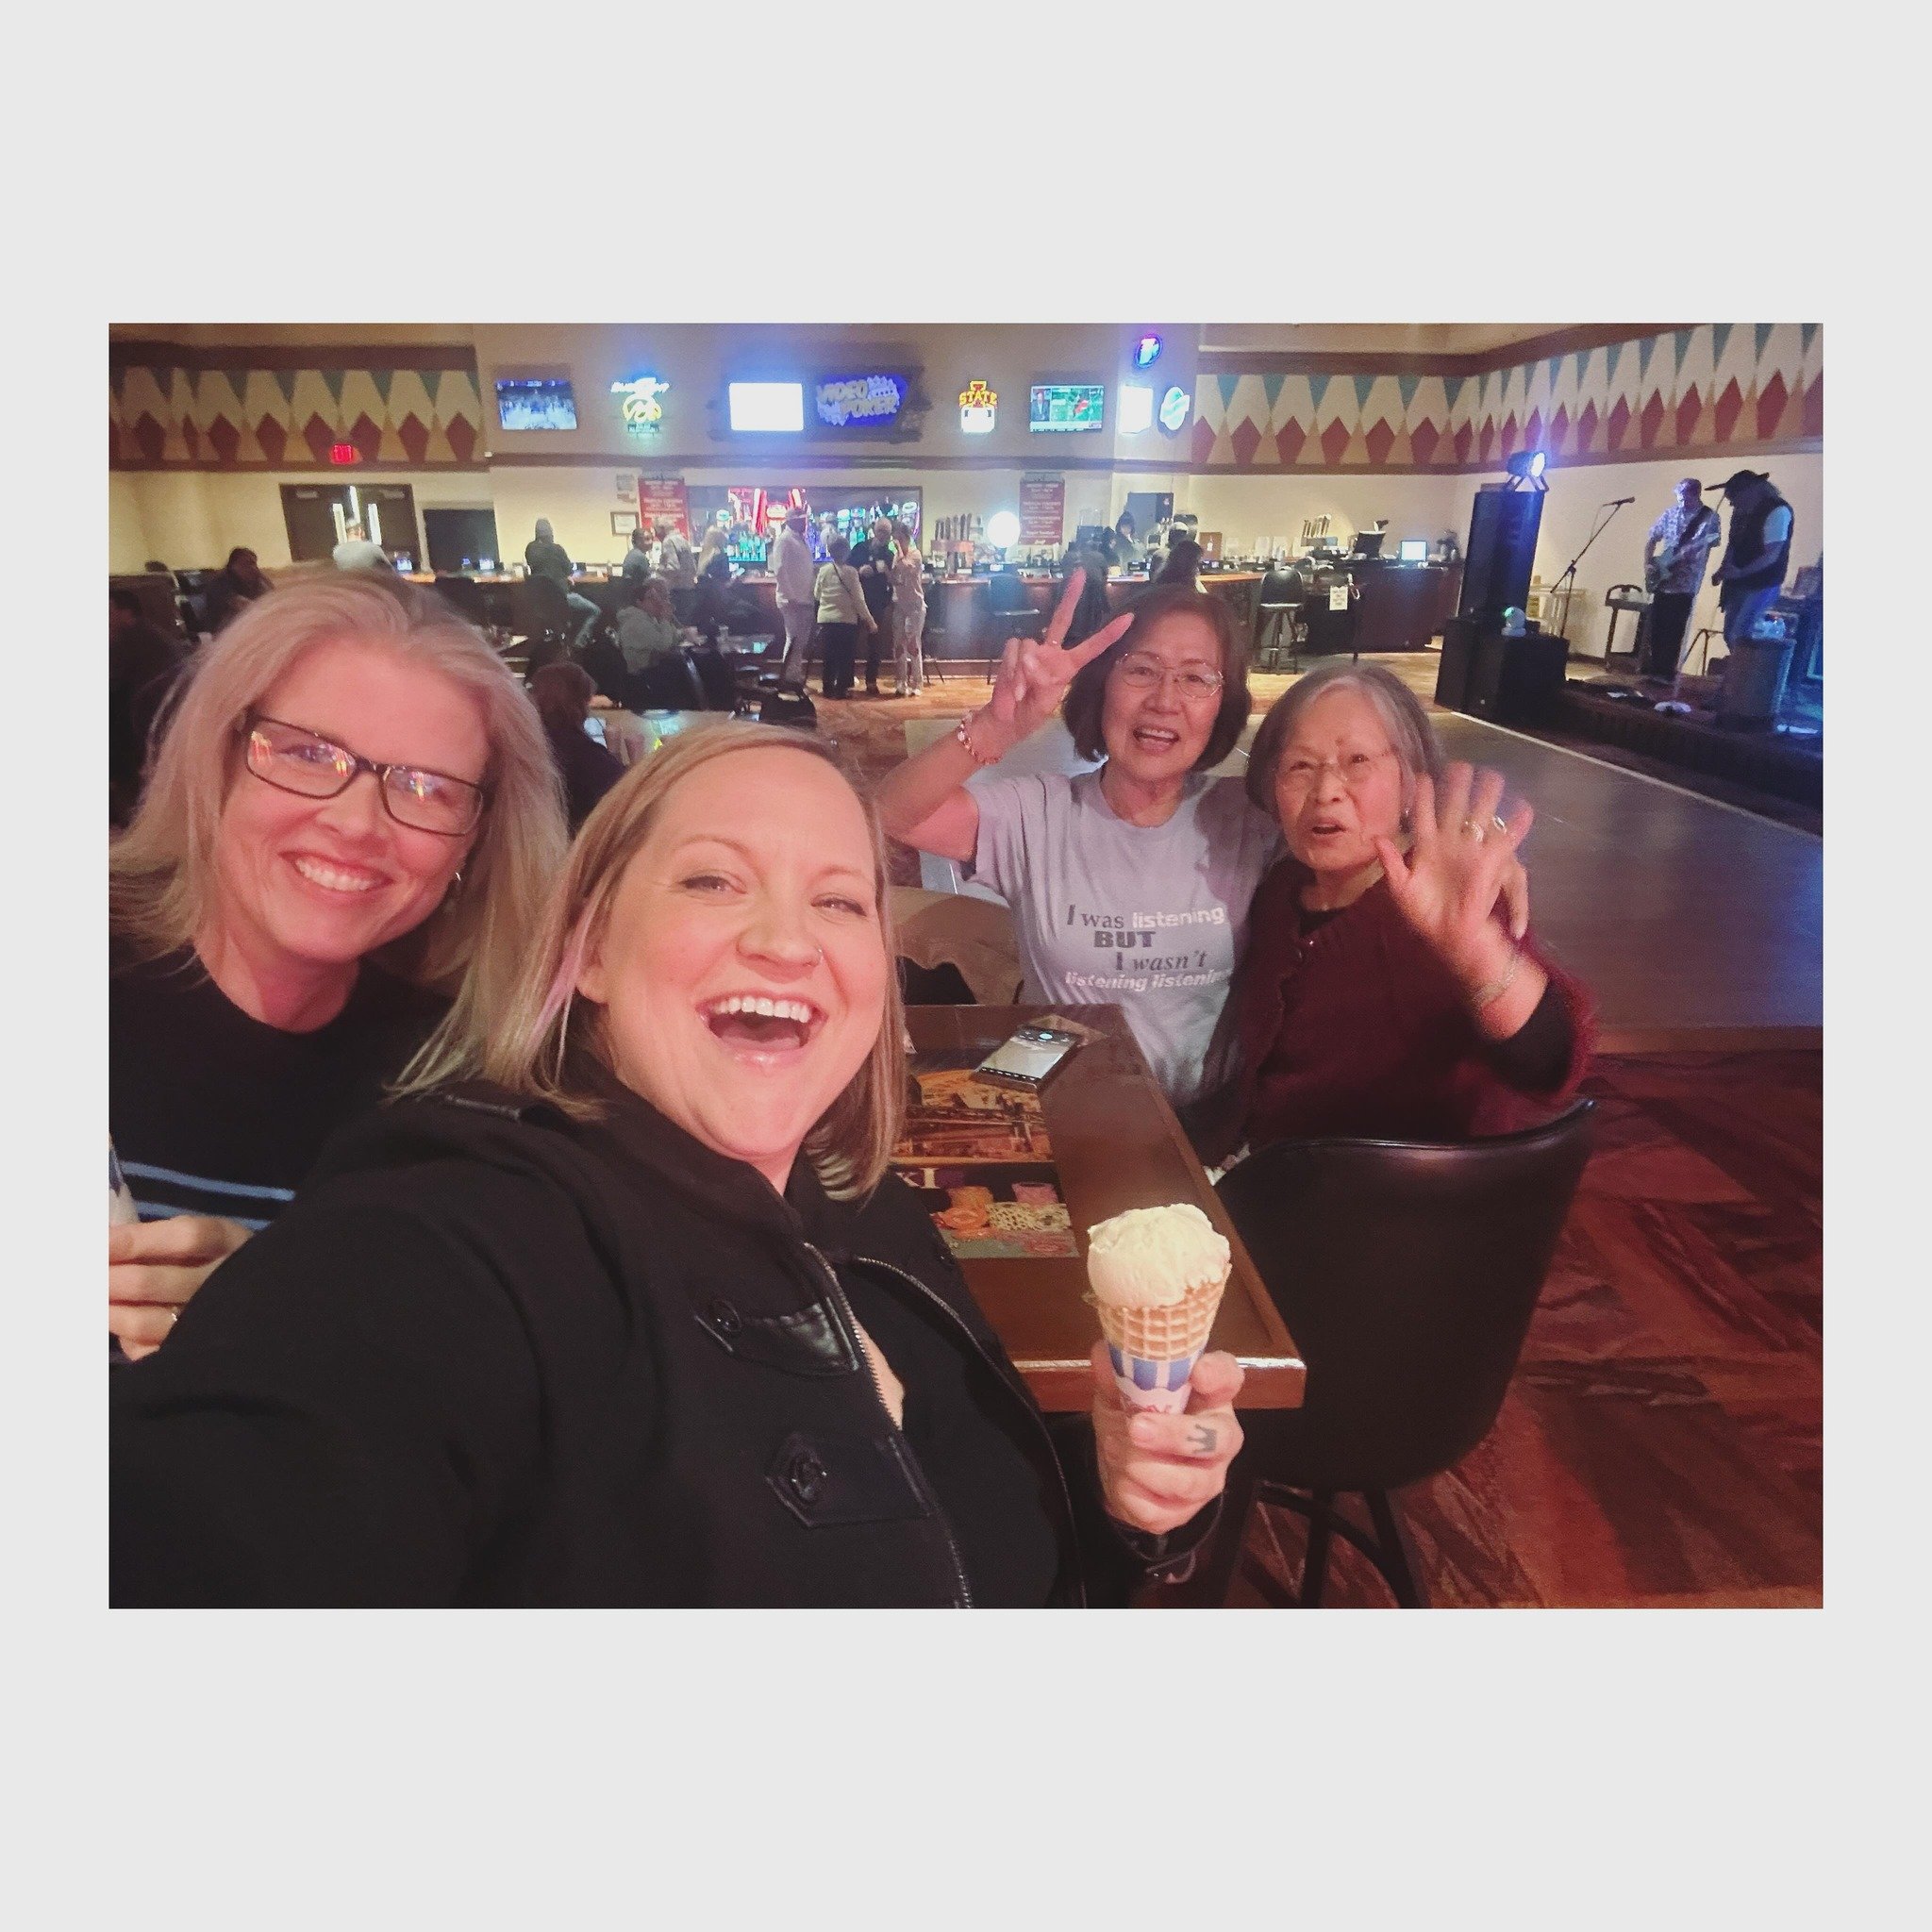 Made friends with these two ladies at the casino last night by sharing our table. Lee (far right) lost her husband in November and her sister flew in from Phoenix to spend some time with her and take her out dancing 💕✨